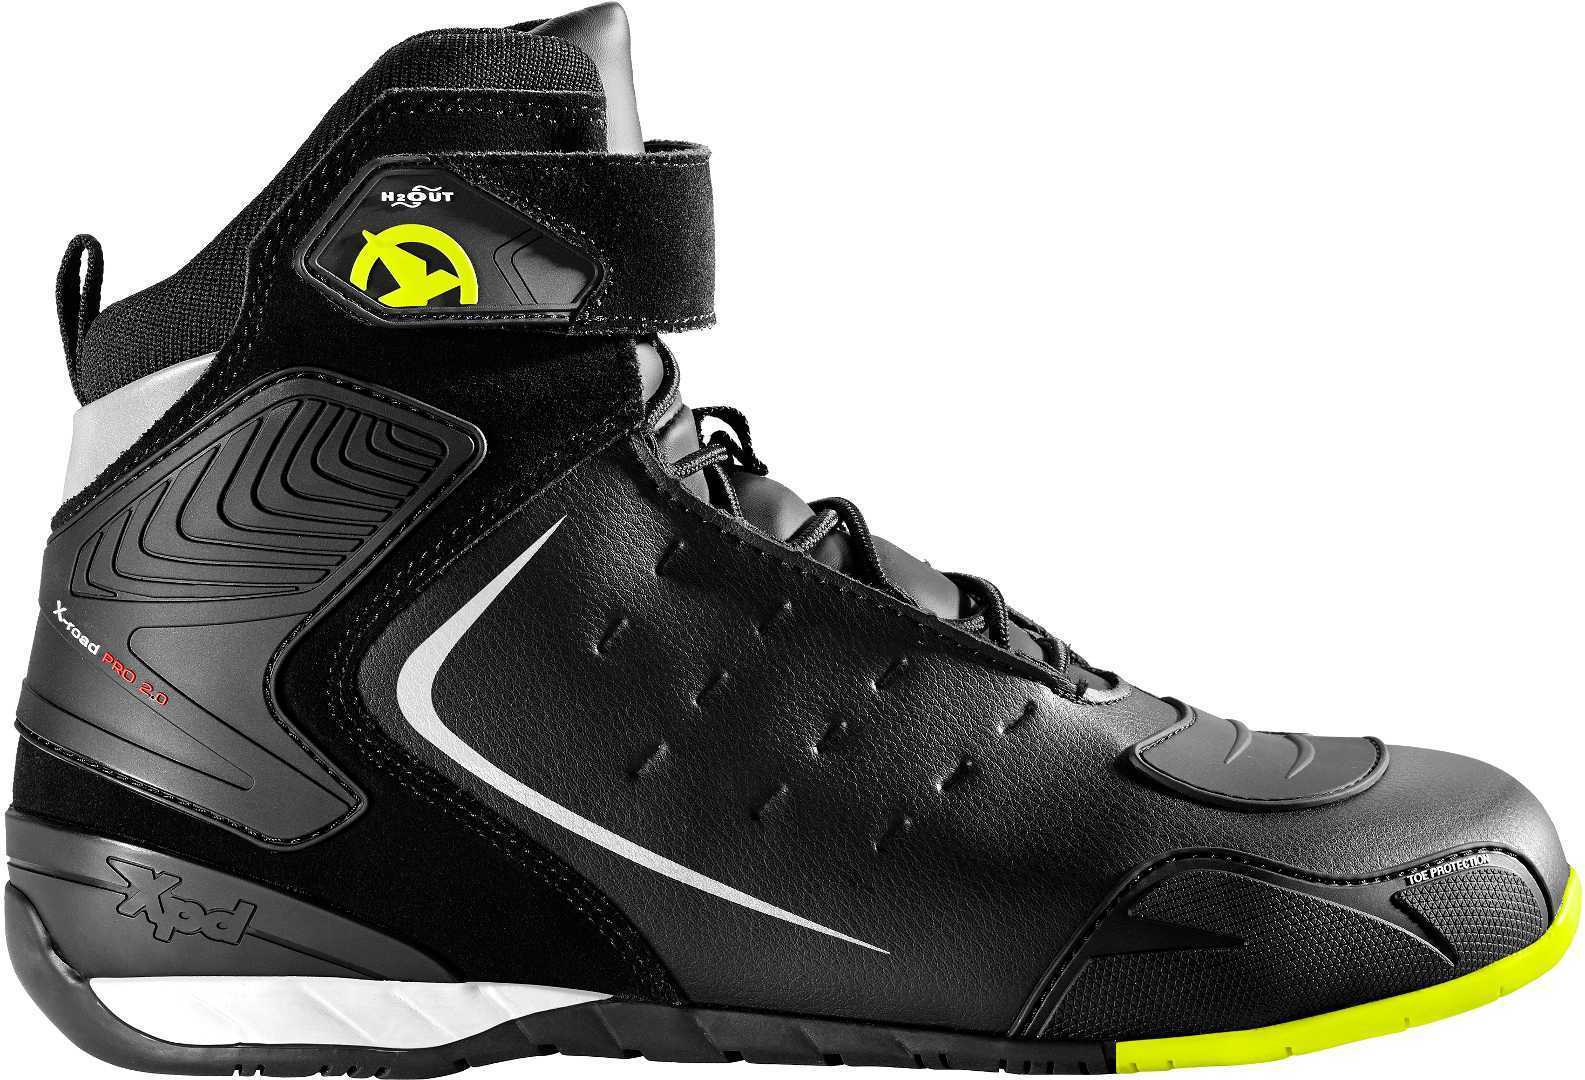 Image of XPD X-Road H2Out Yellow Fluo Size 47 ID 8030161345193